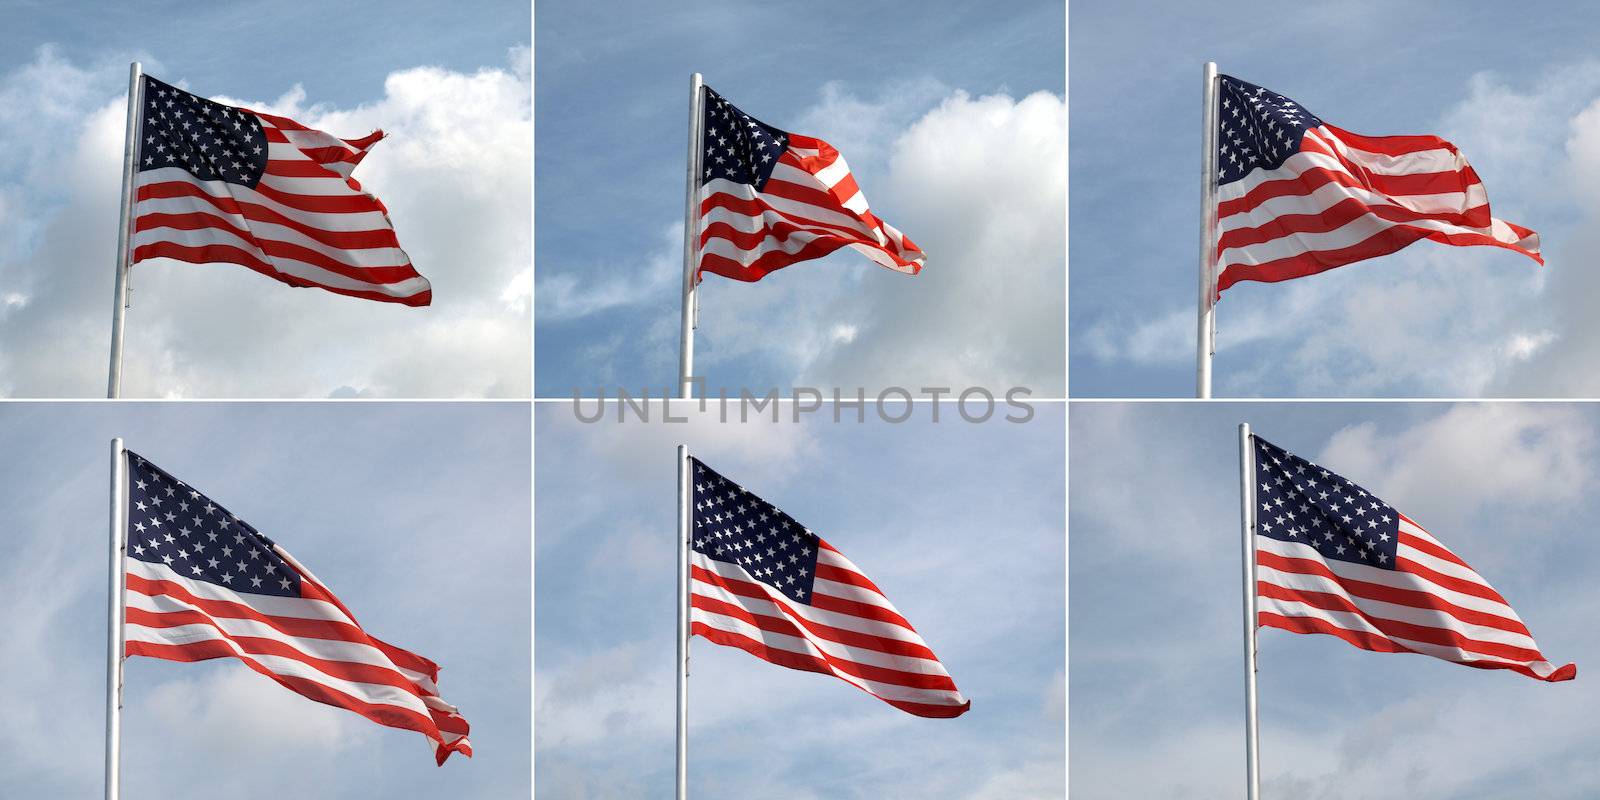 Flags of the USA (United States of America) collage